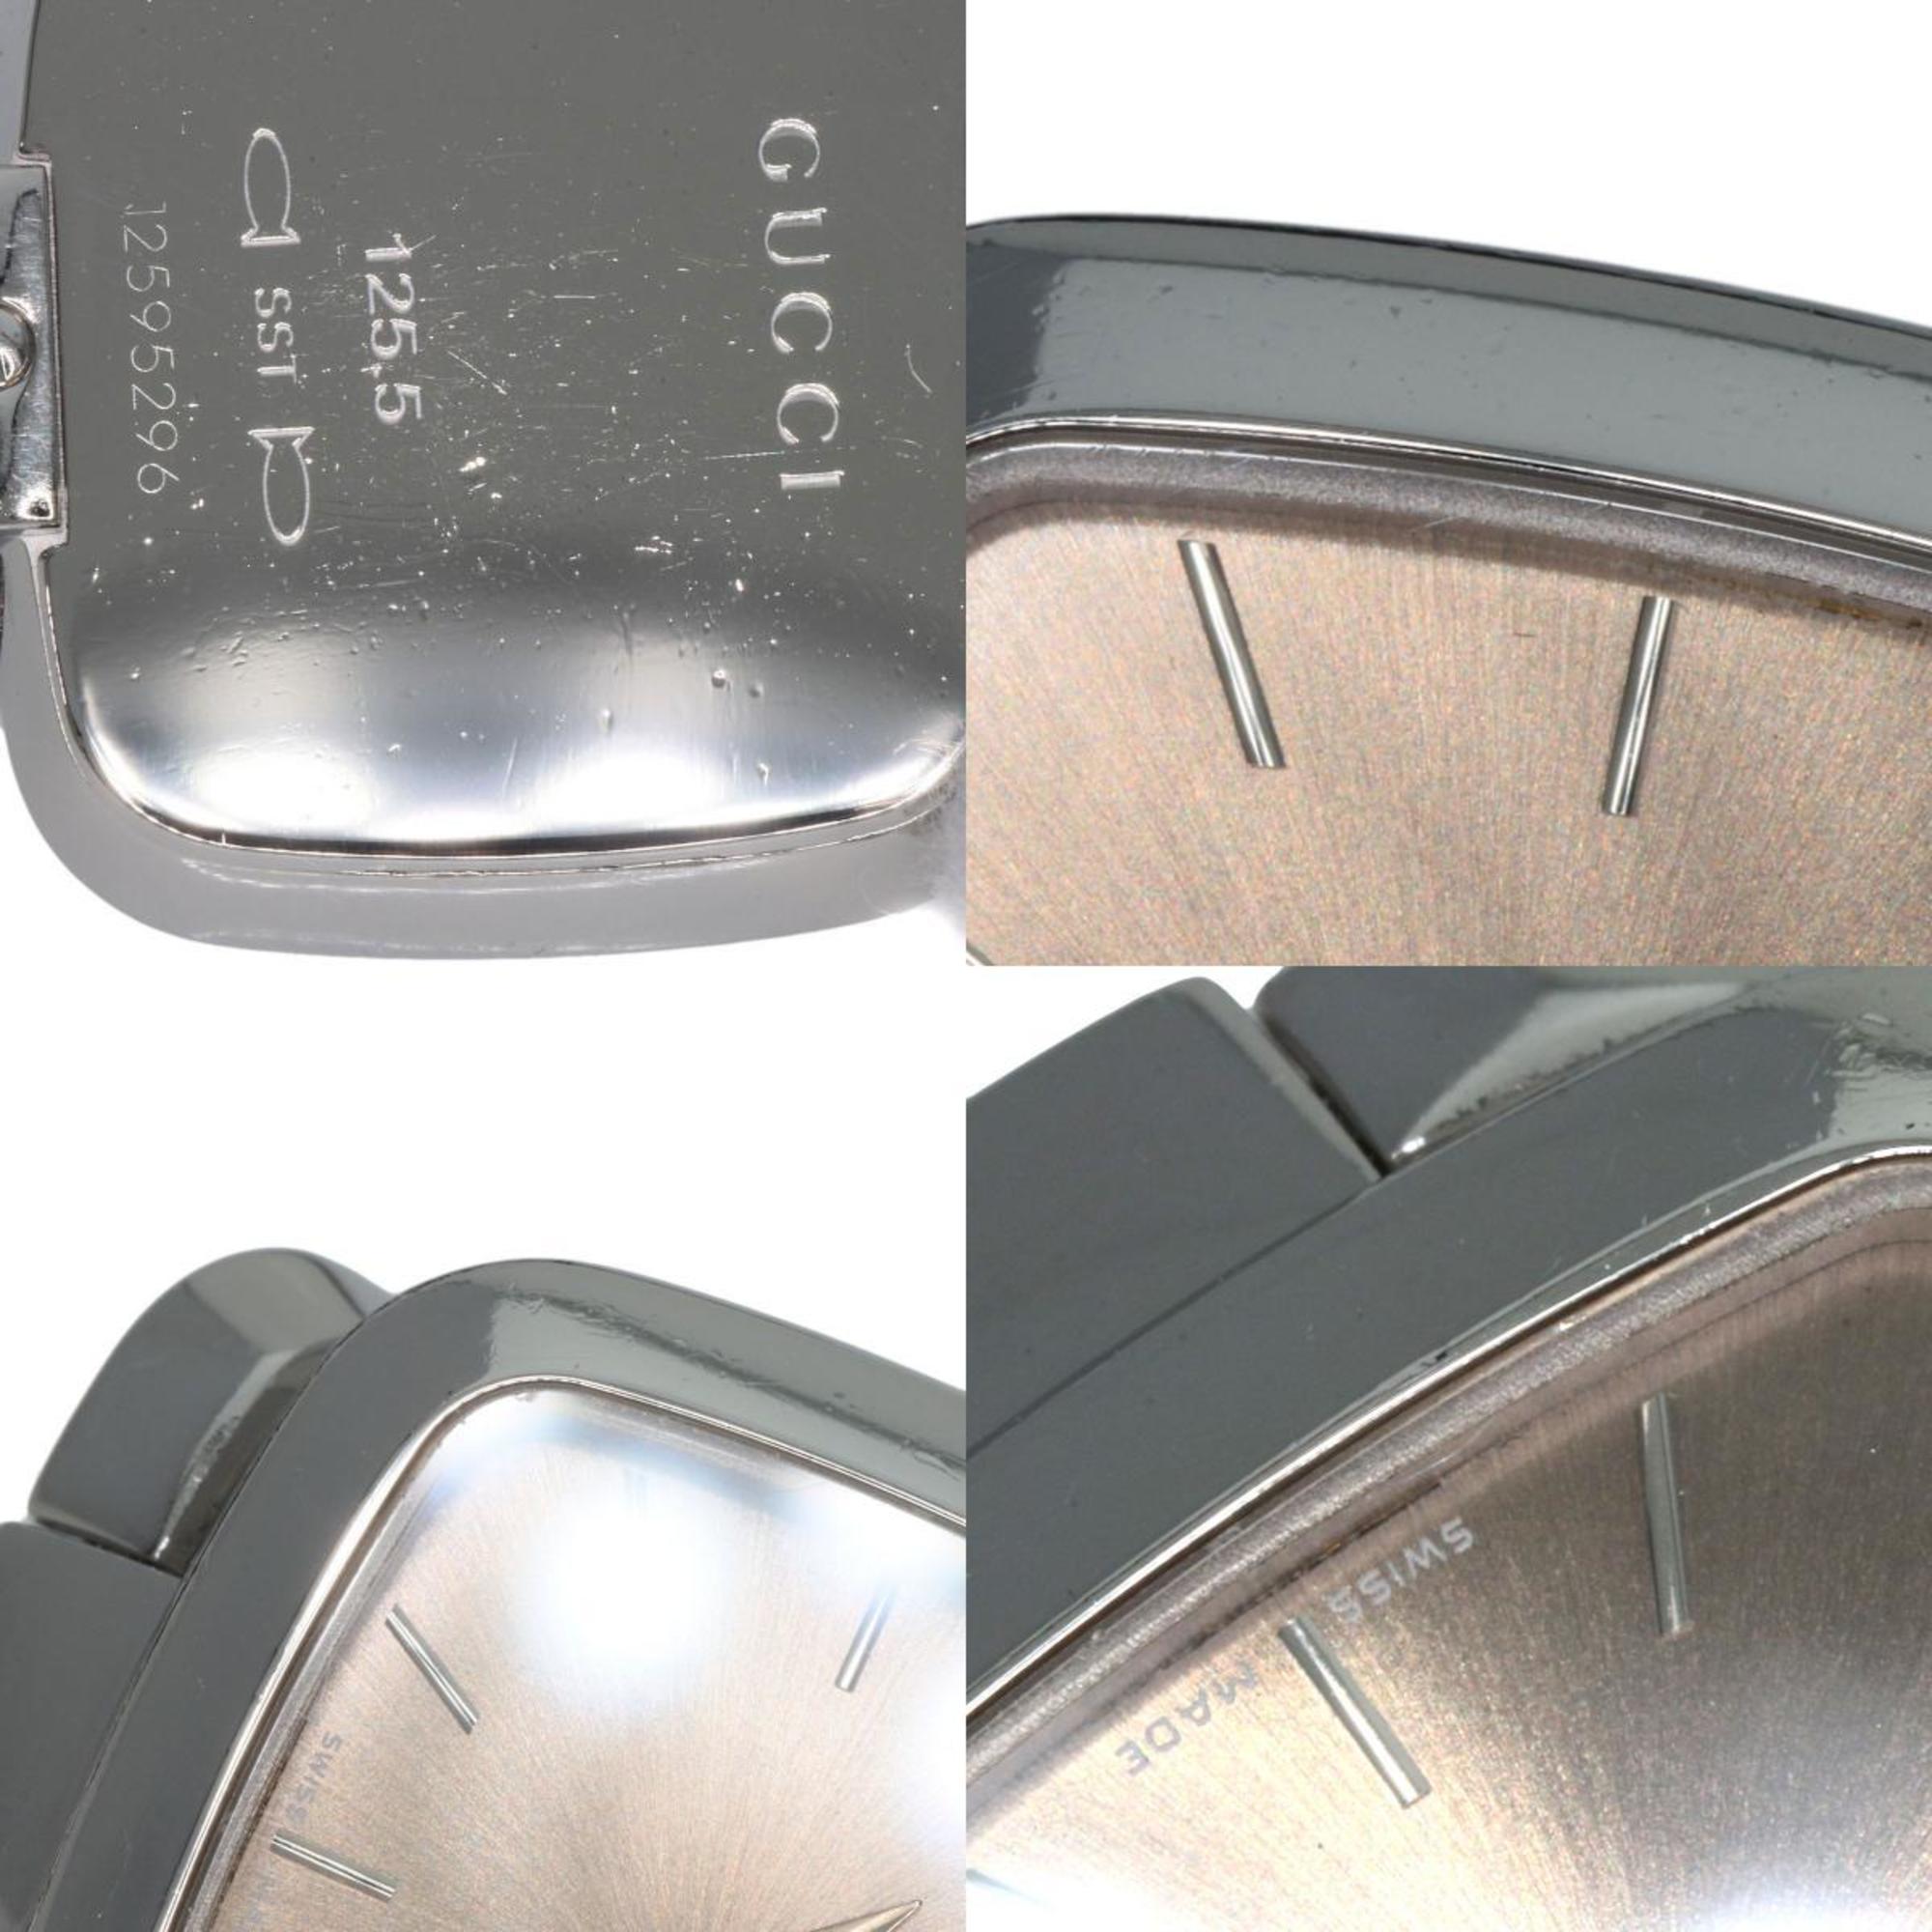 Gucci YA125.5 G Collection Watch Stainless Steel SS Ladies